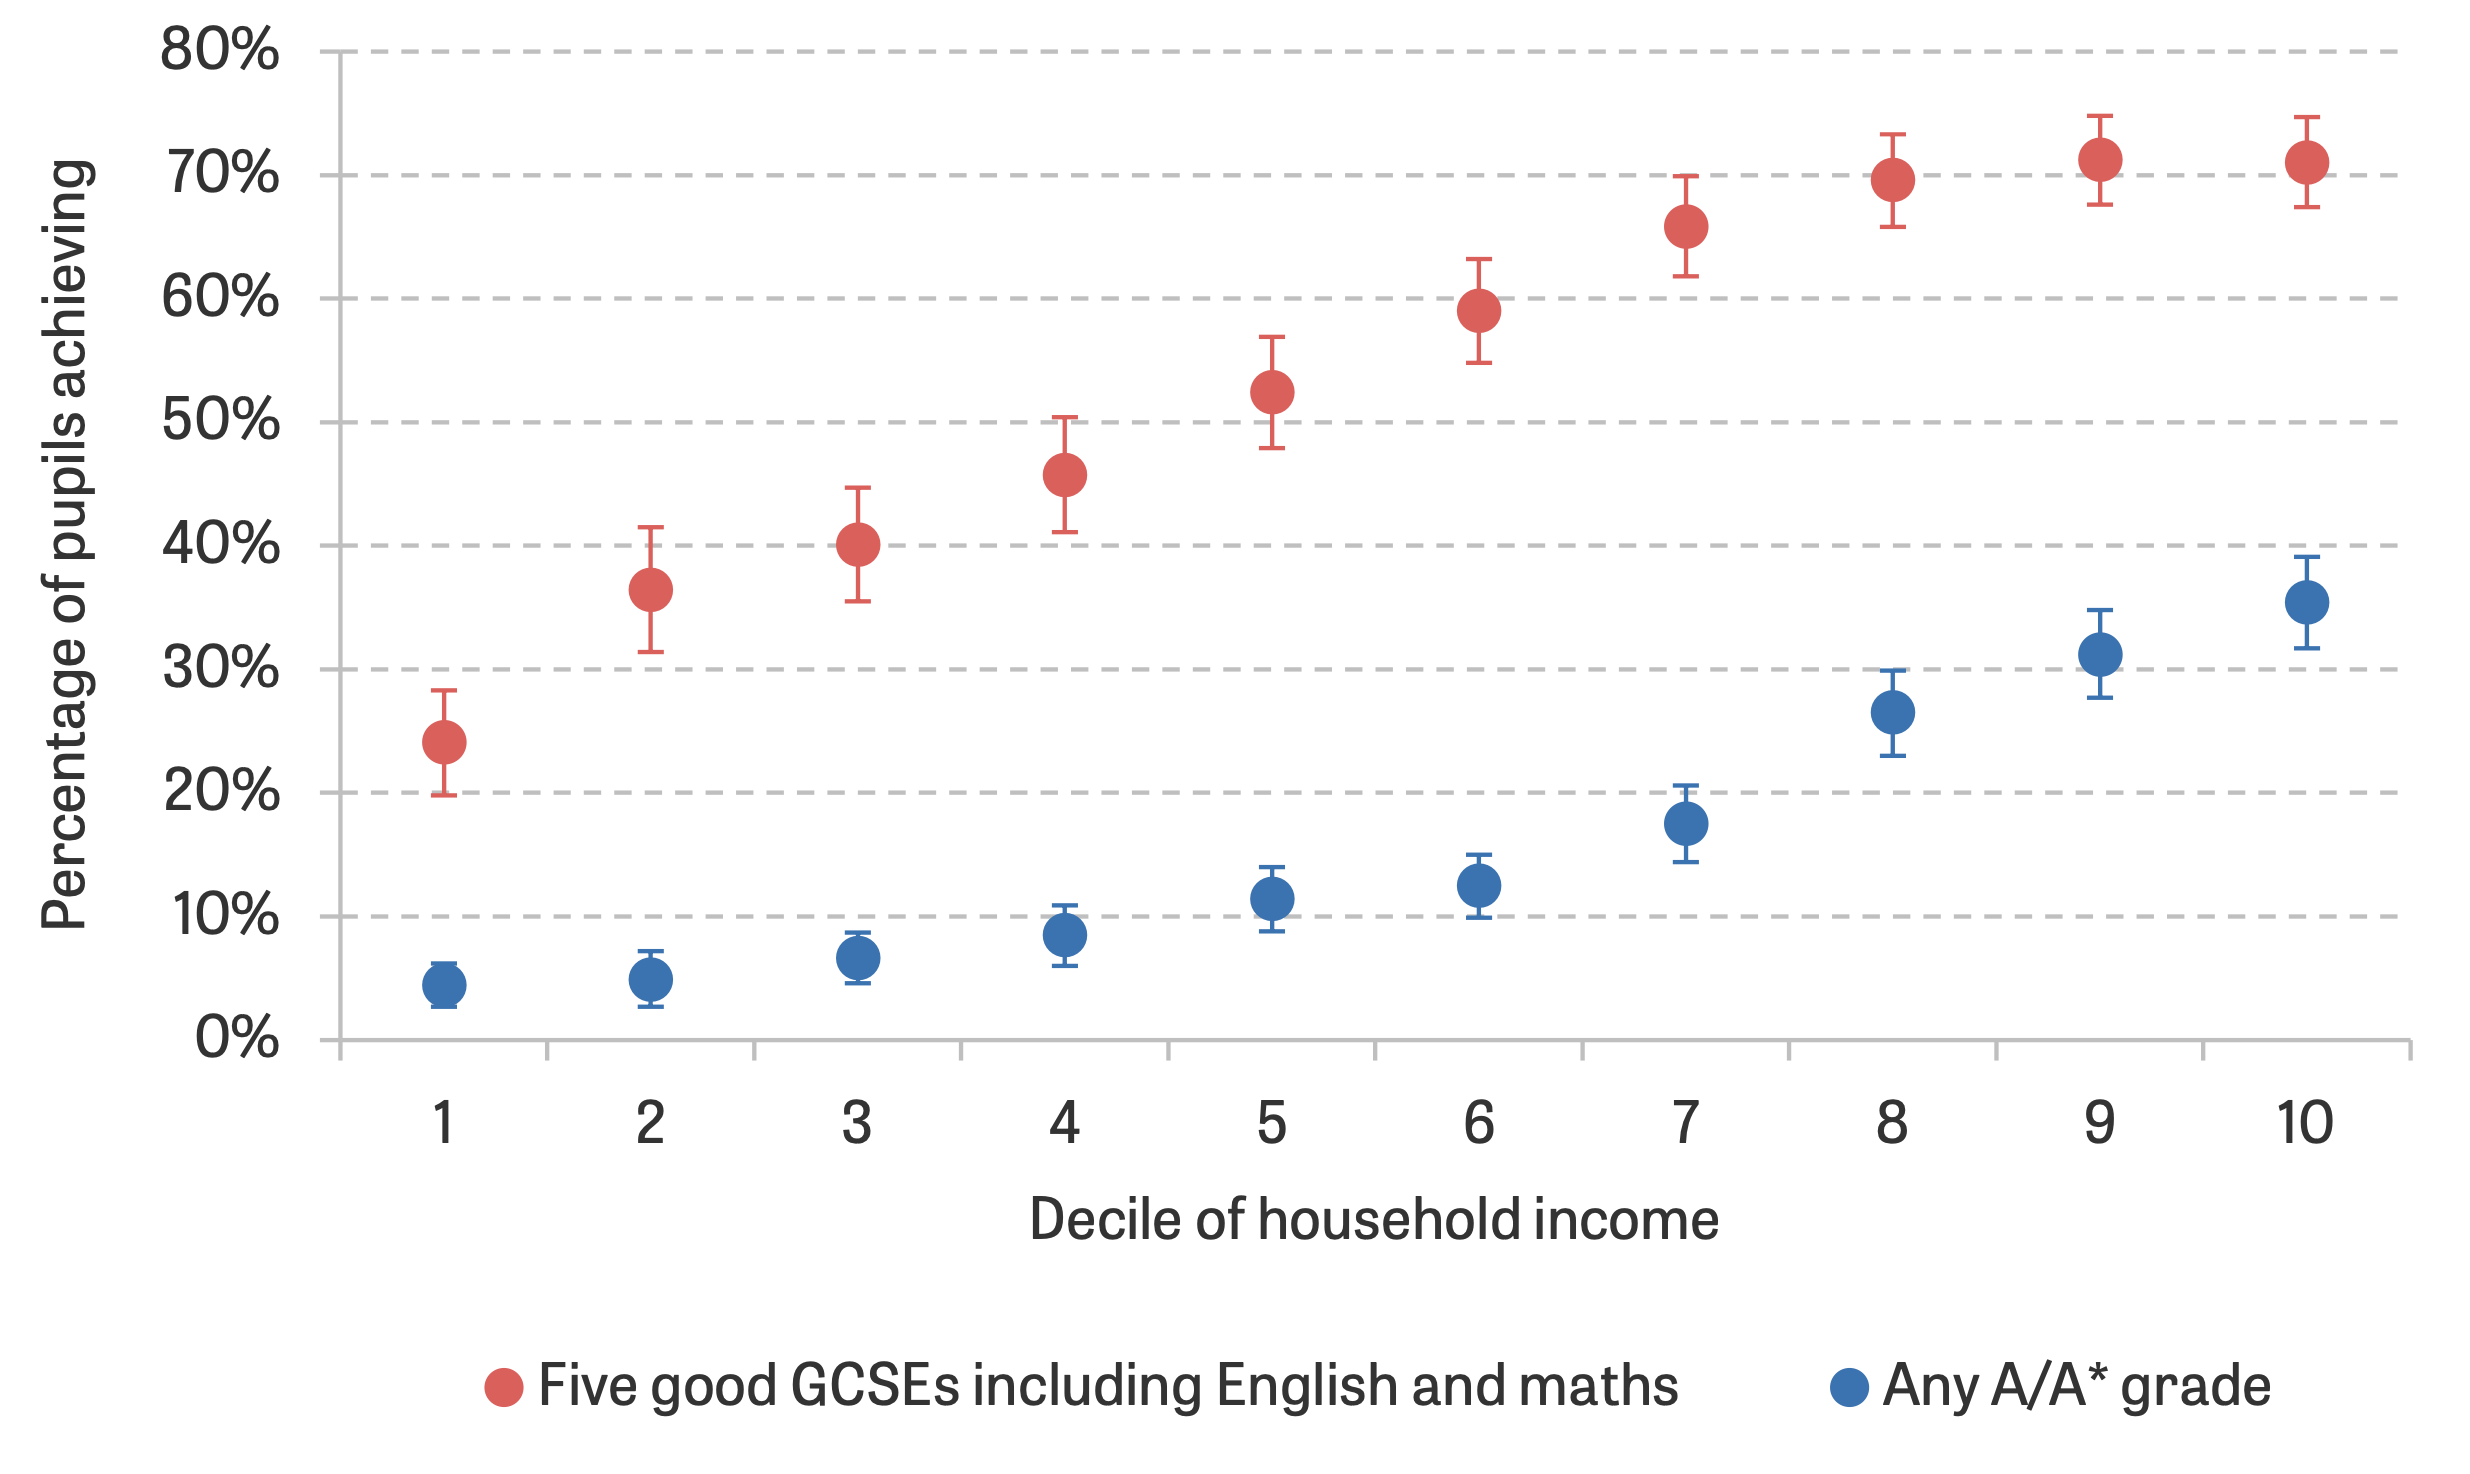 GCSE attainment by household income